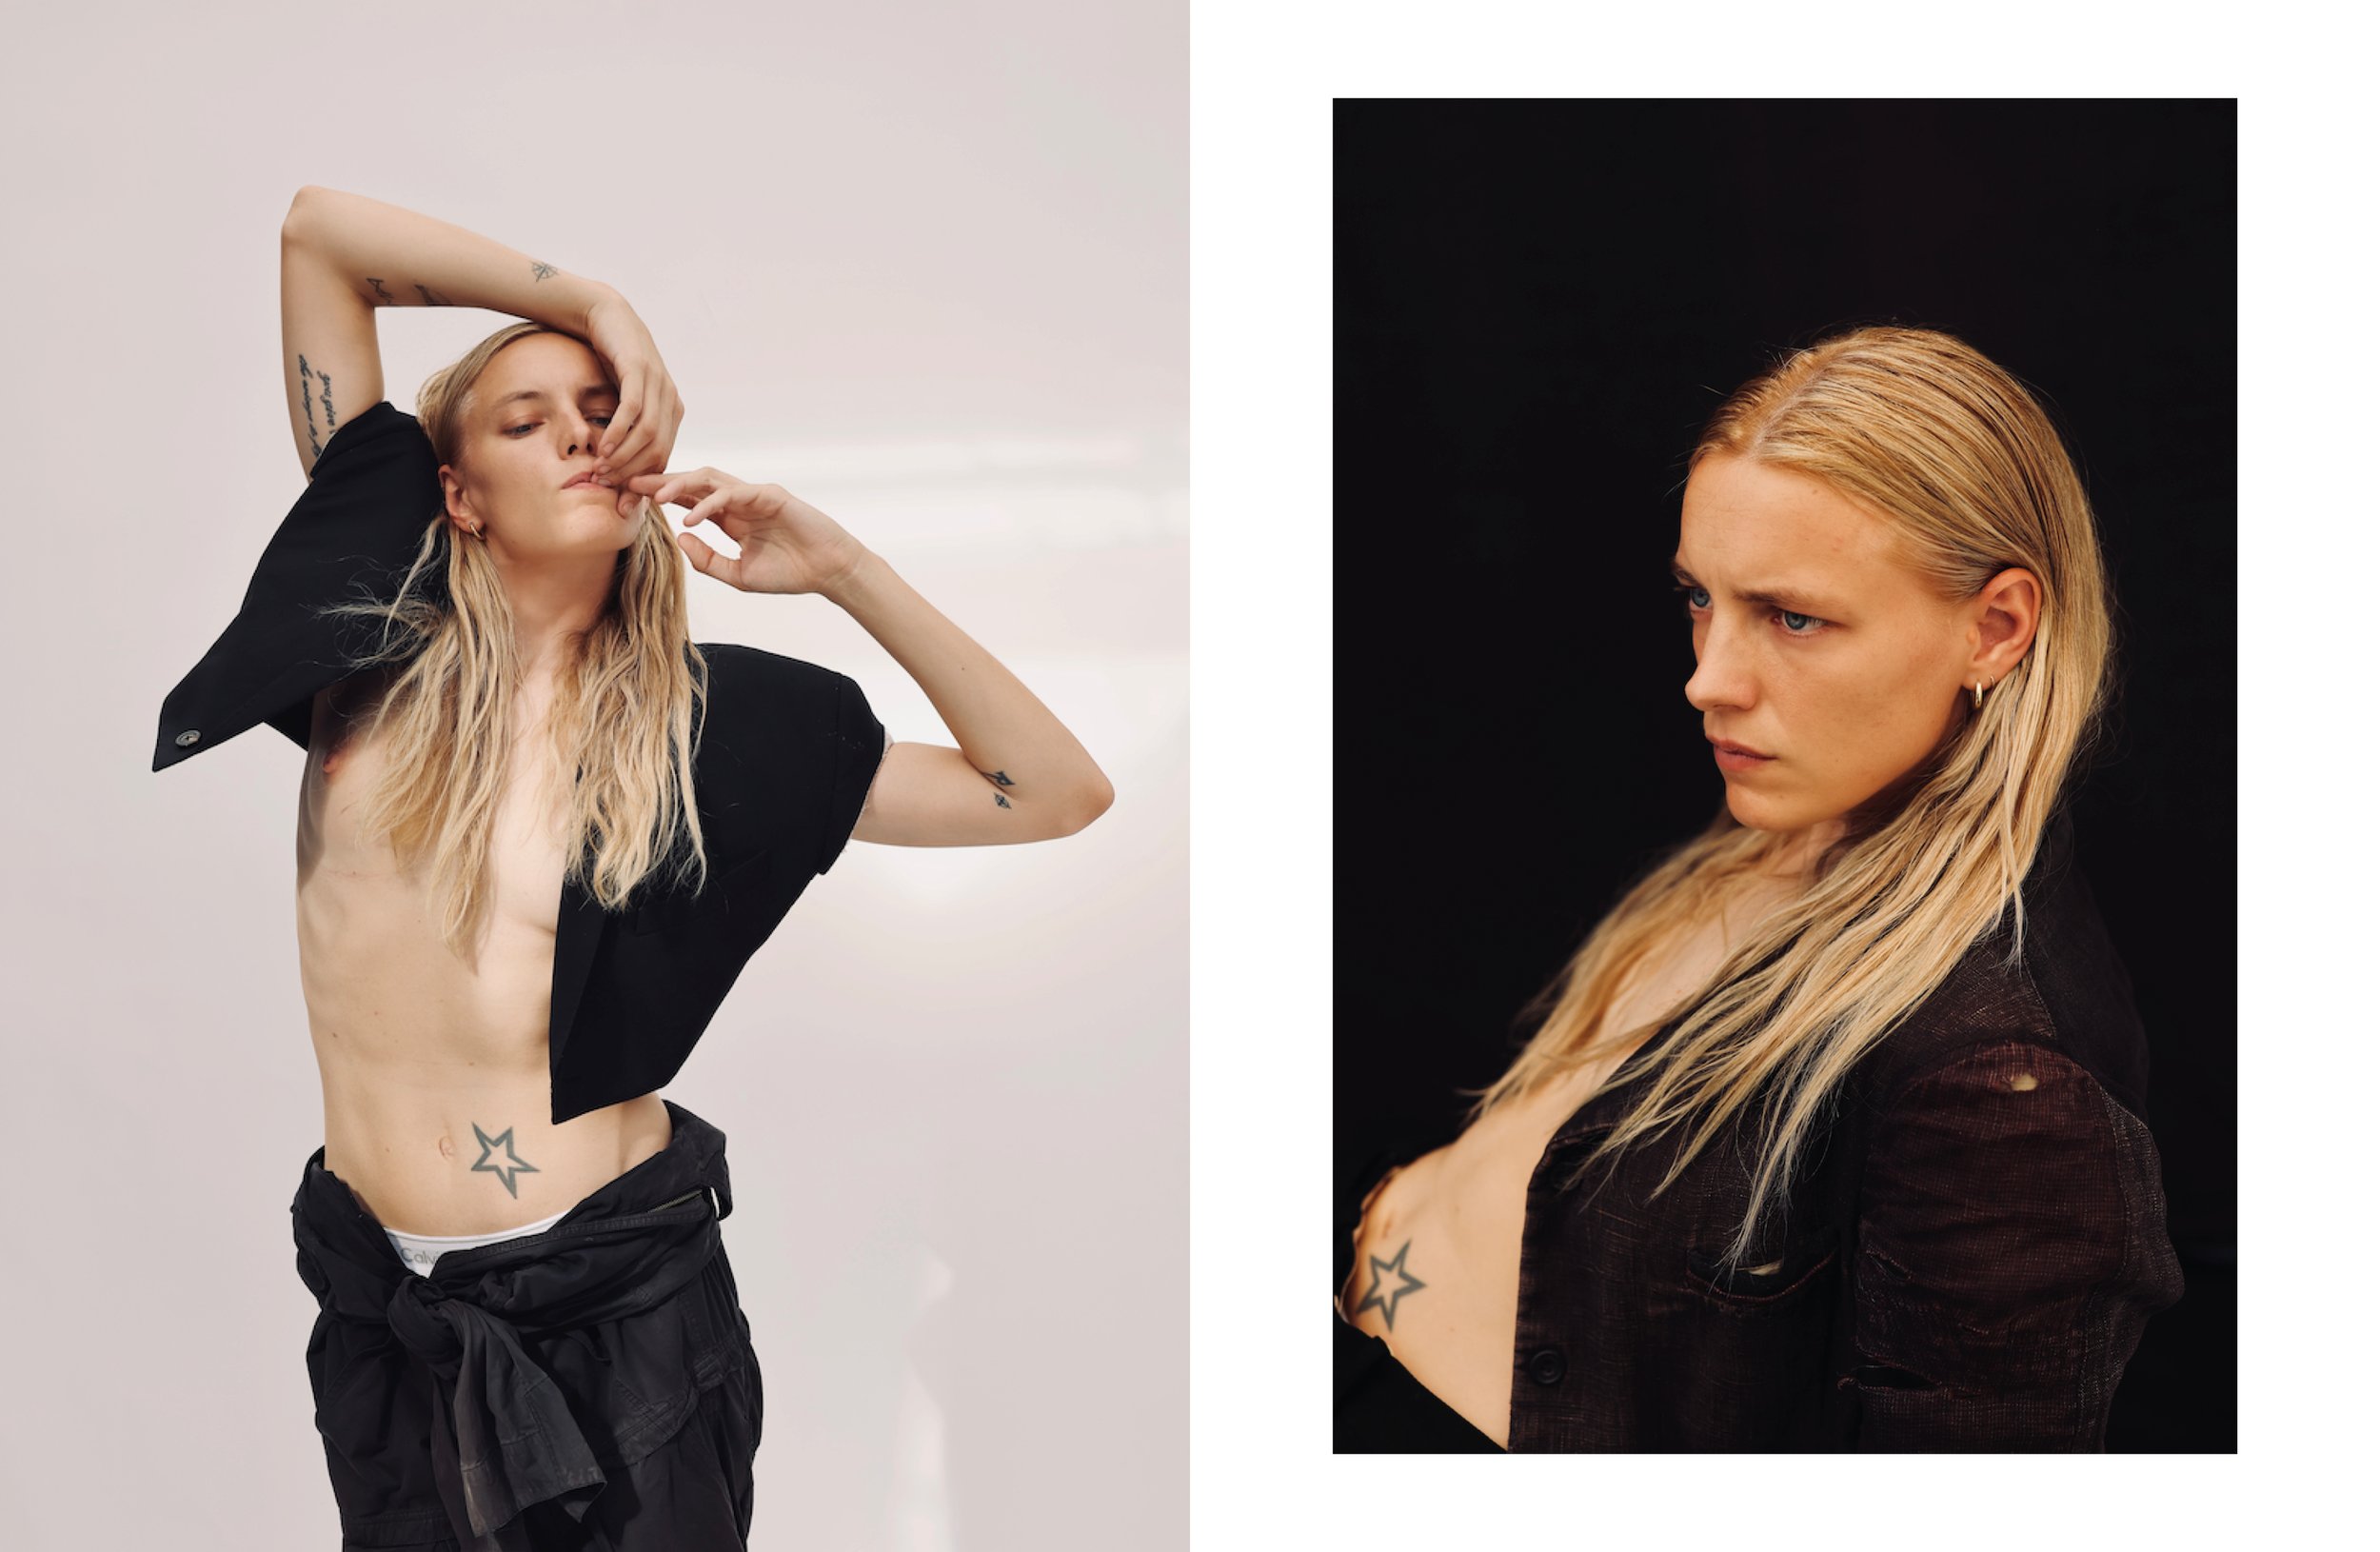 Erika linder movies and tv shows